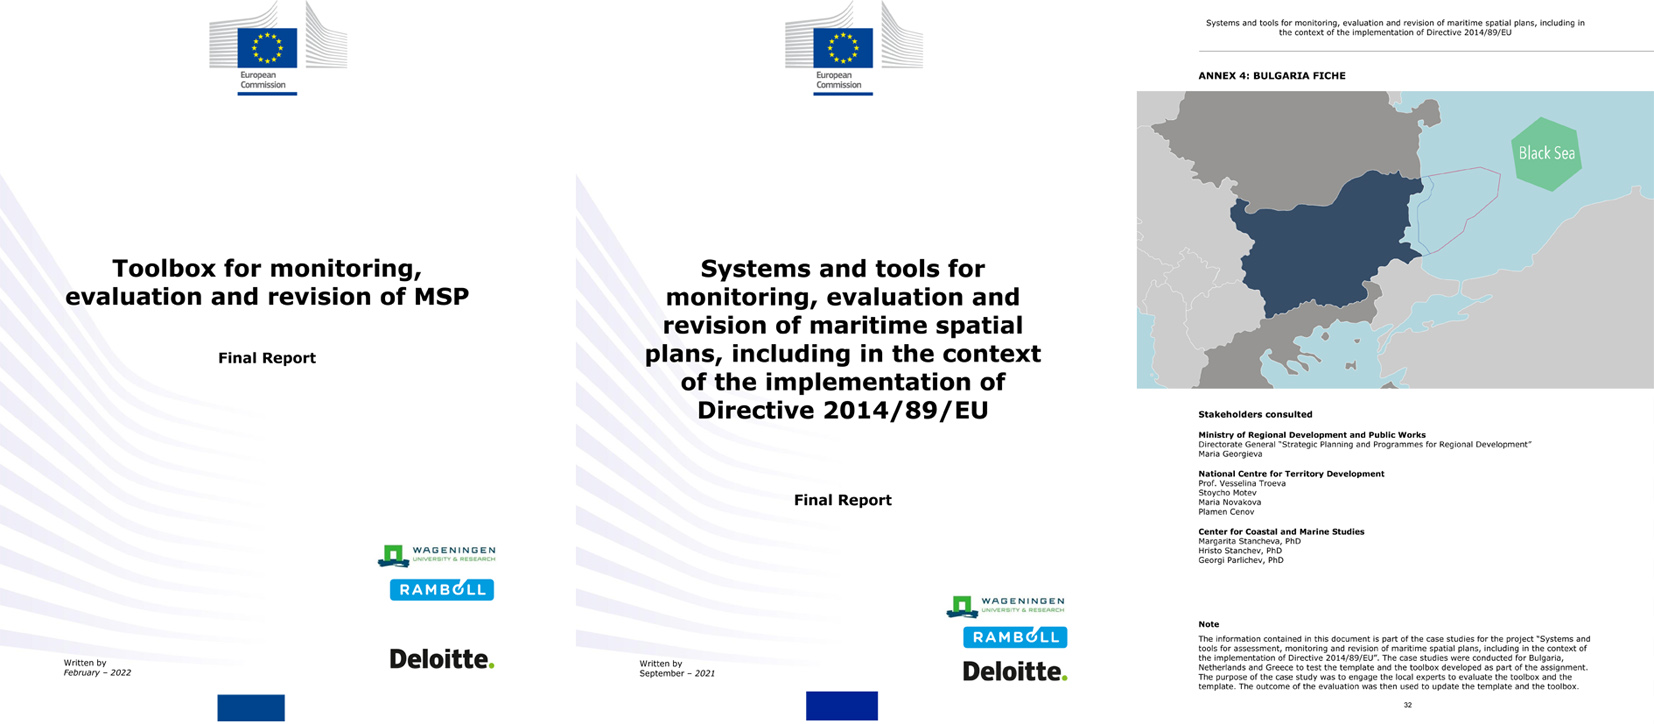 Systems and tools for monitoring evaluation and revision of maritime spatial plans